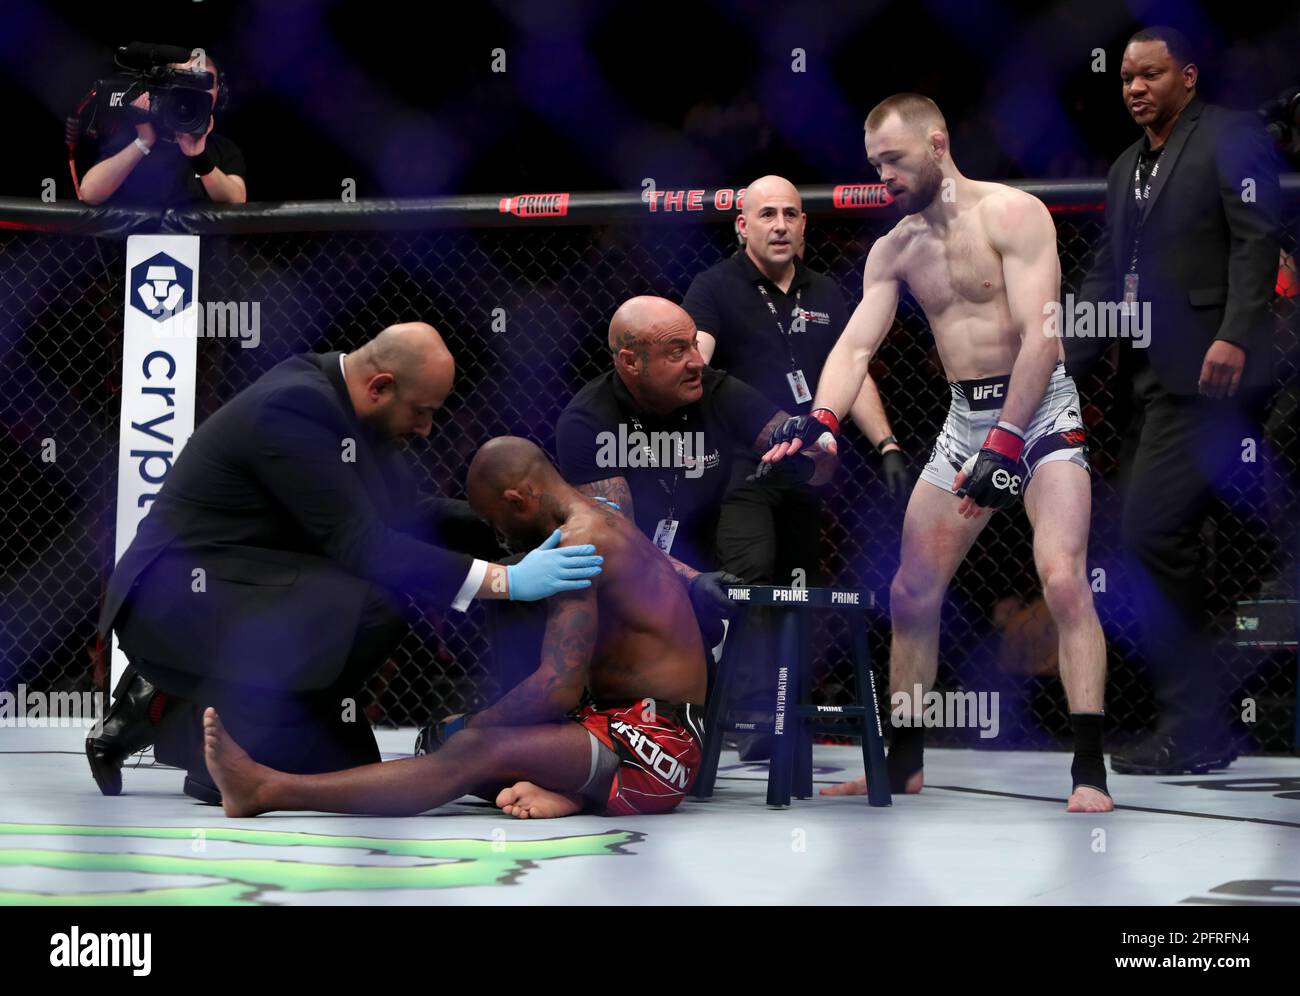 Canada's Malcolm Gordon (second left) is seen to by officials after the referee ended his Men's Flyweight bout against United Kingdom's Jake Hadley (second right) during UFC 286 at 02 Arena, London Picture date: Saturday March 18, 2023. Stock Photo